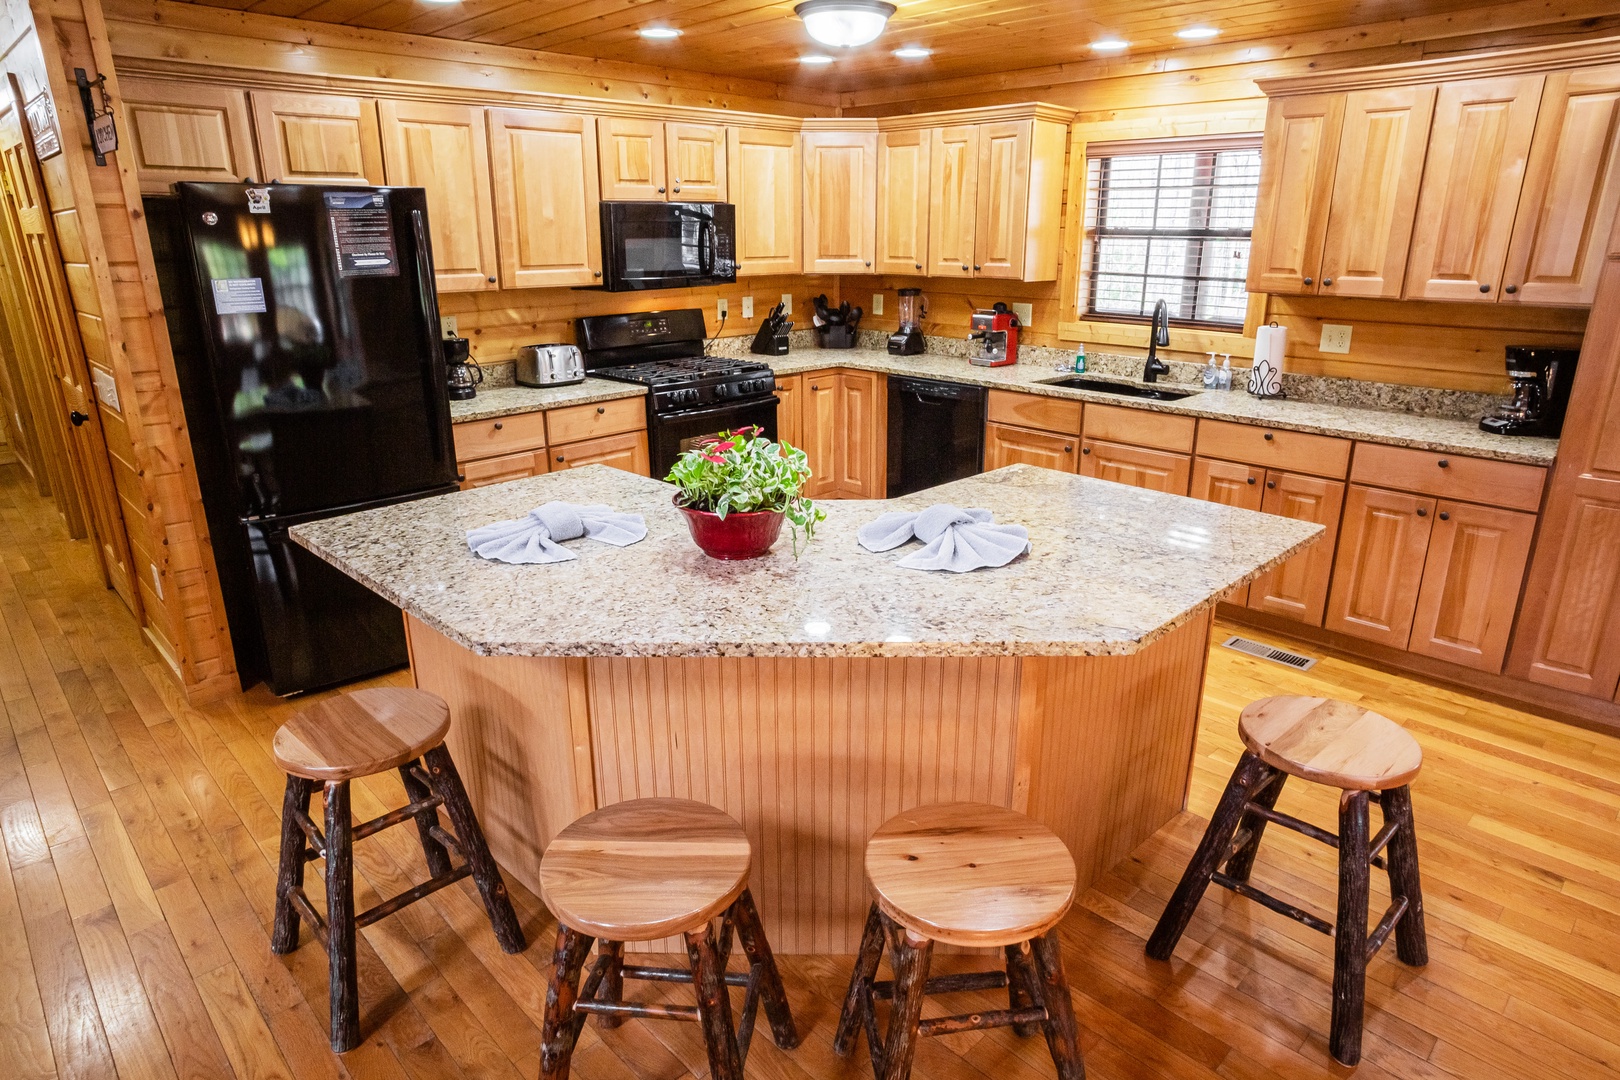 Breakfast bar at 3 Crazy Cubs, a 5 bedroom cabin rental located in pigeon forge